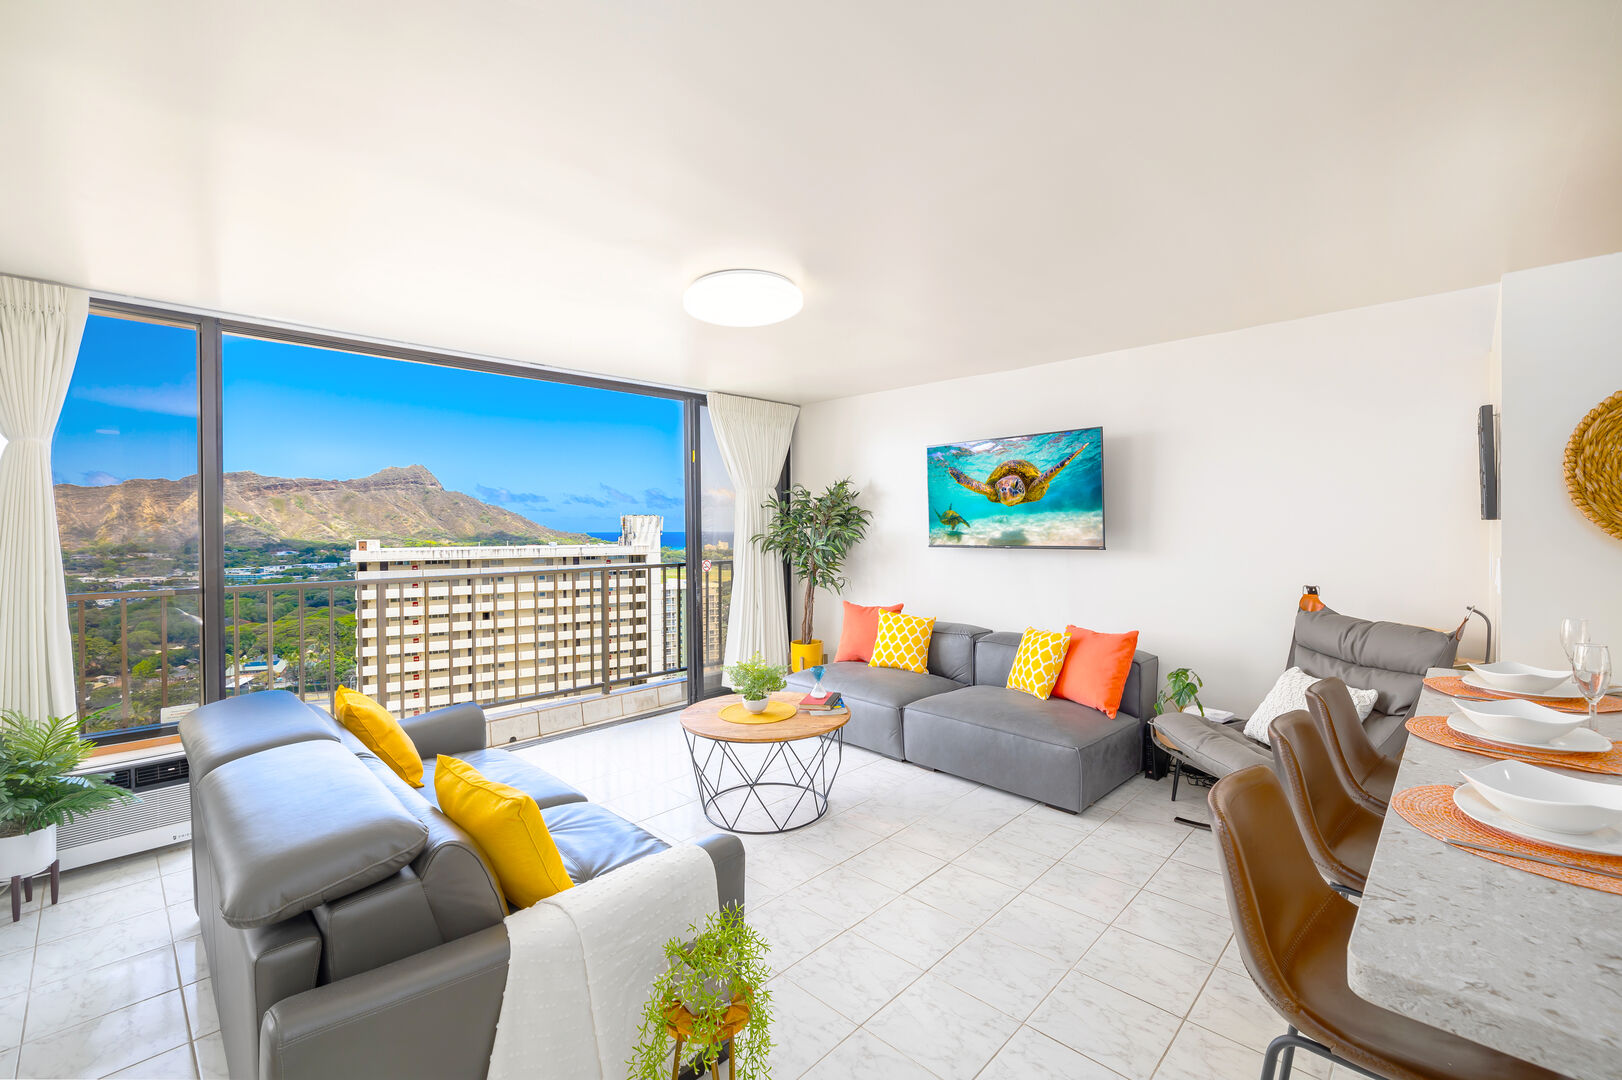 Enjoy your stay in this beautiful condo with stunning ocean and diamond-head views from your living room!